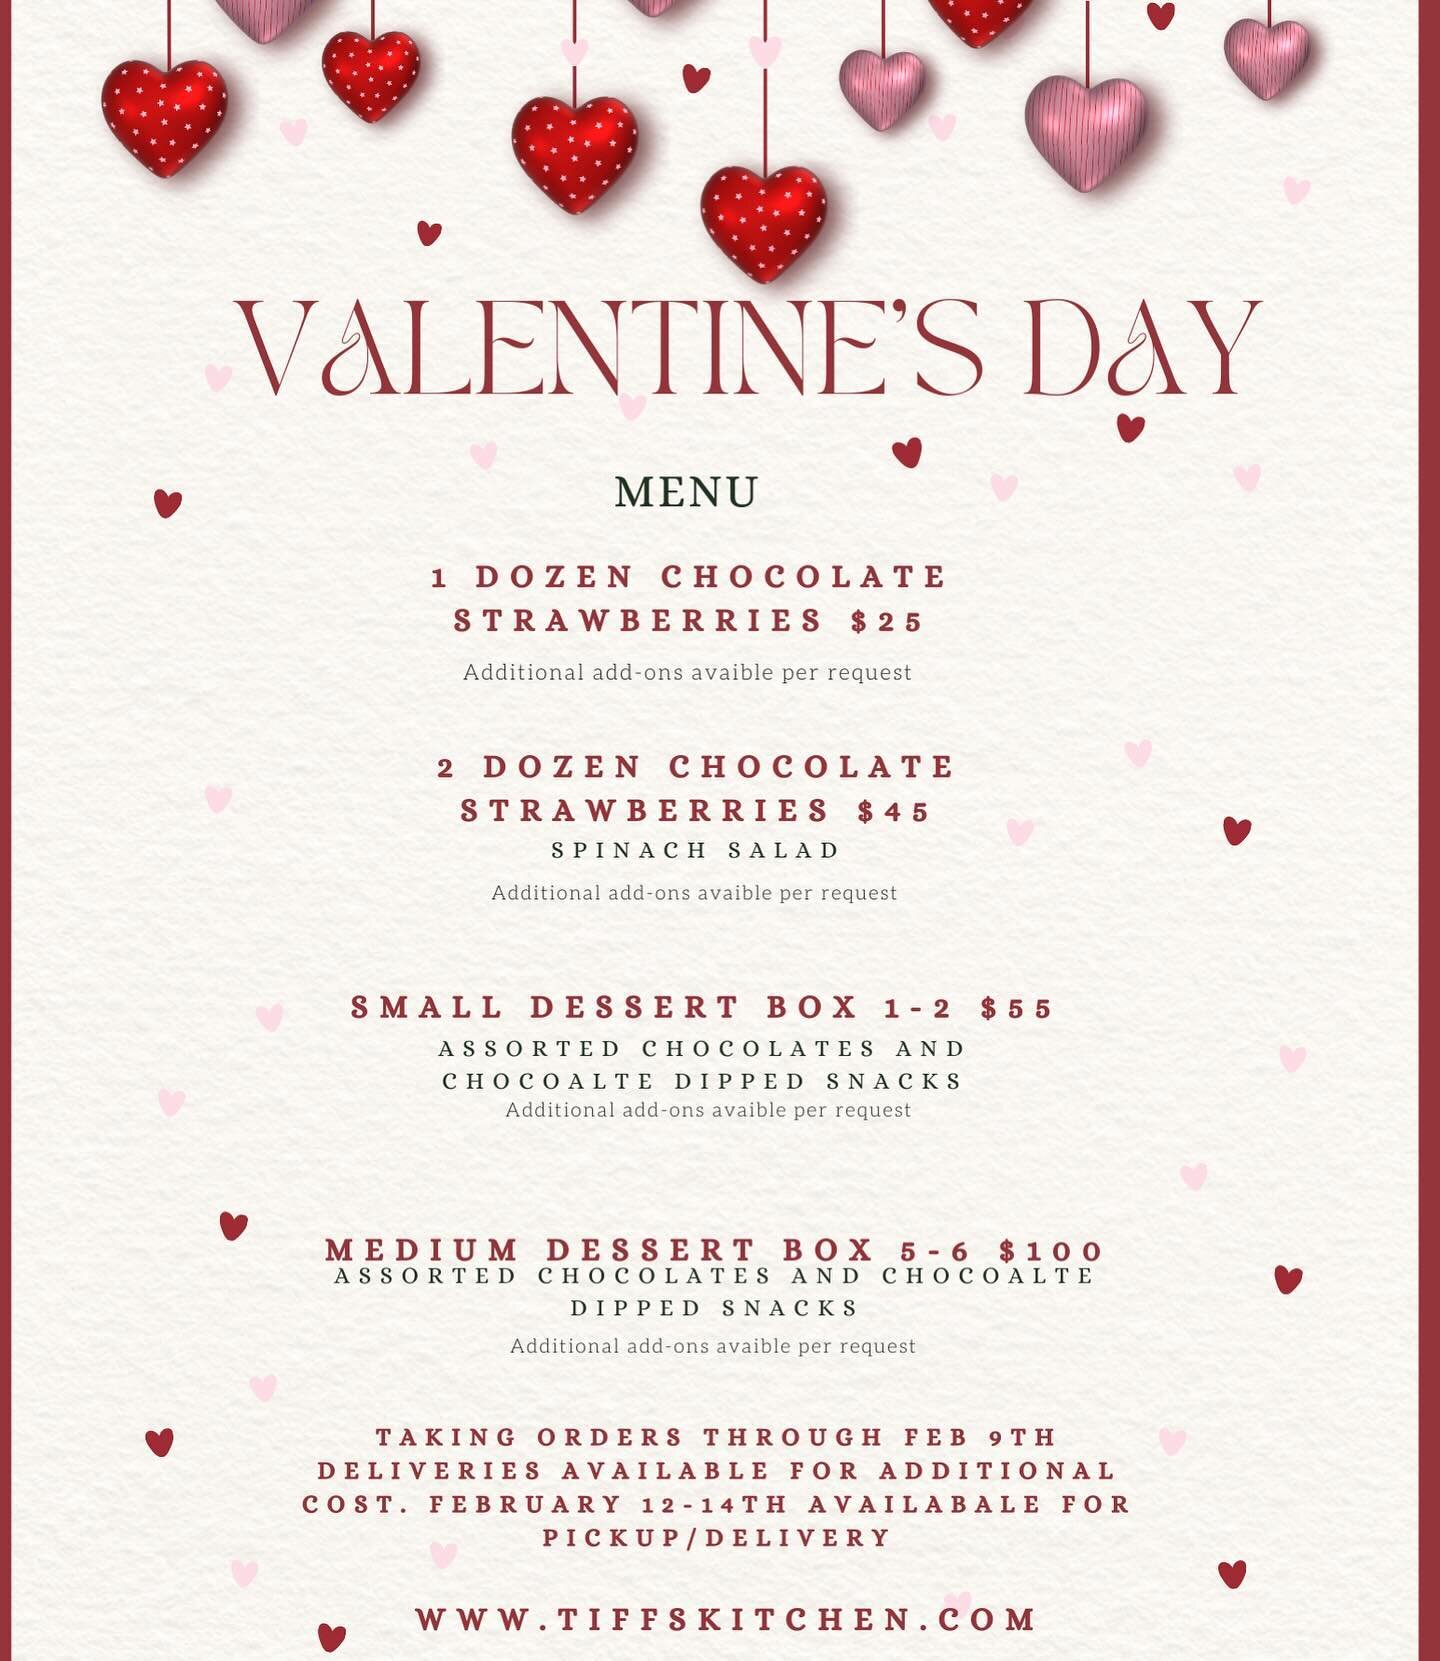 💕VALENTINES MENU💕 

Taking orders through February 9th for pickup/delivery February 12-14! Limited availability as our February calendar is filling fast with events. 🫶🏼 

DM or text to place your order!